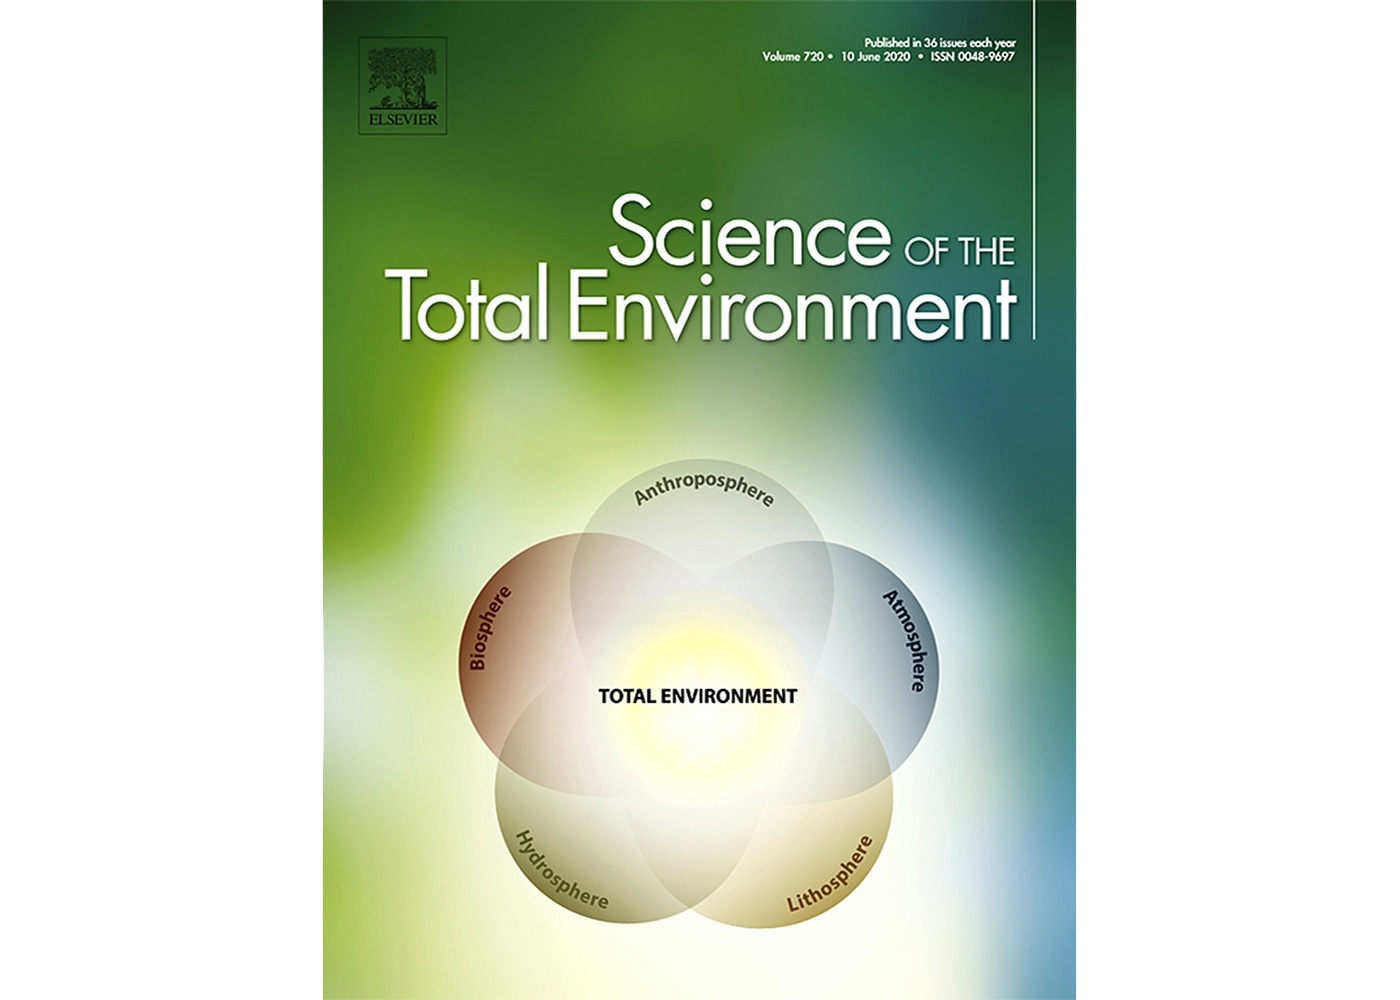 Science of the Total Environment - RemBind